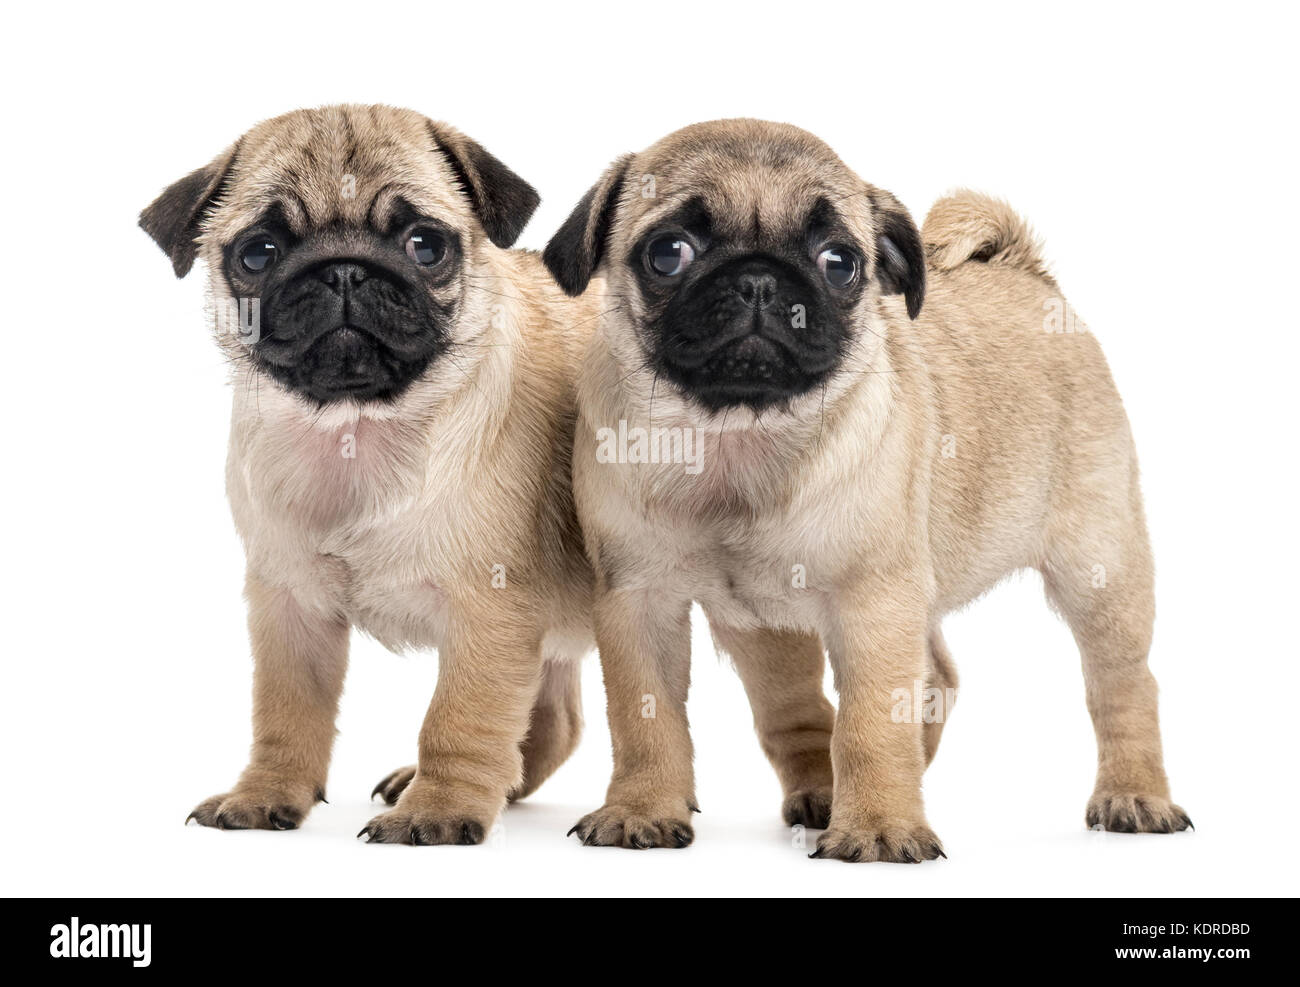 Pug puppies side by side, isolated on white Stock Photo - Alamy